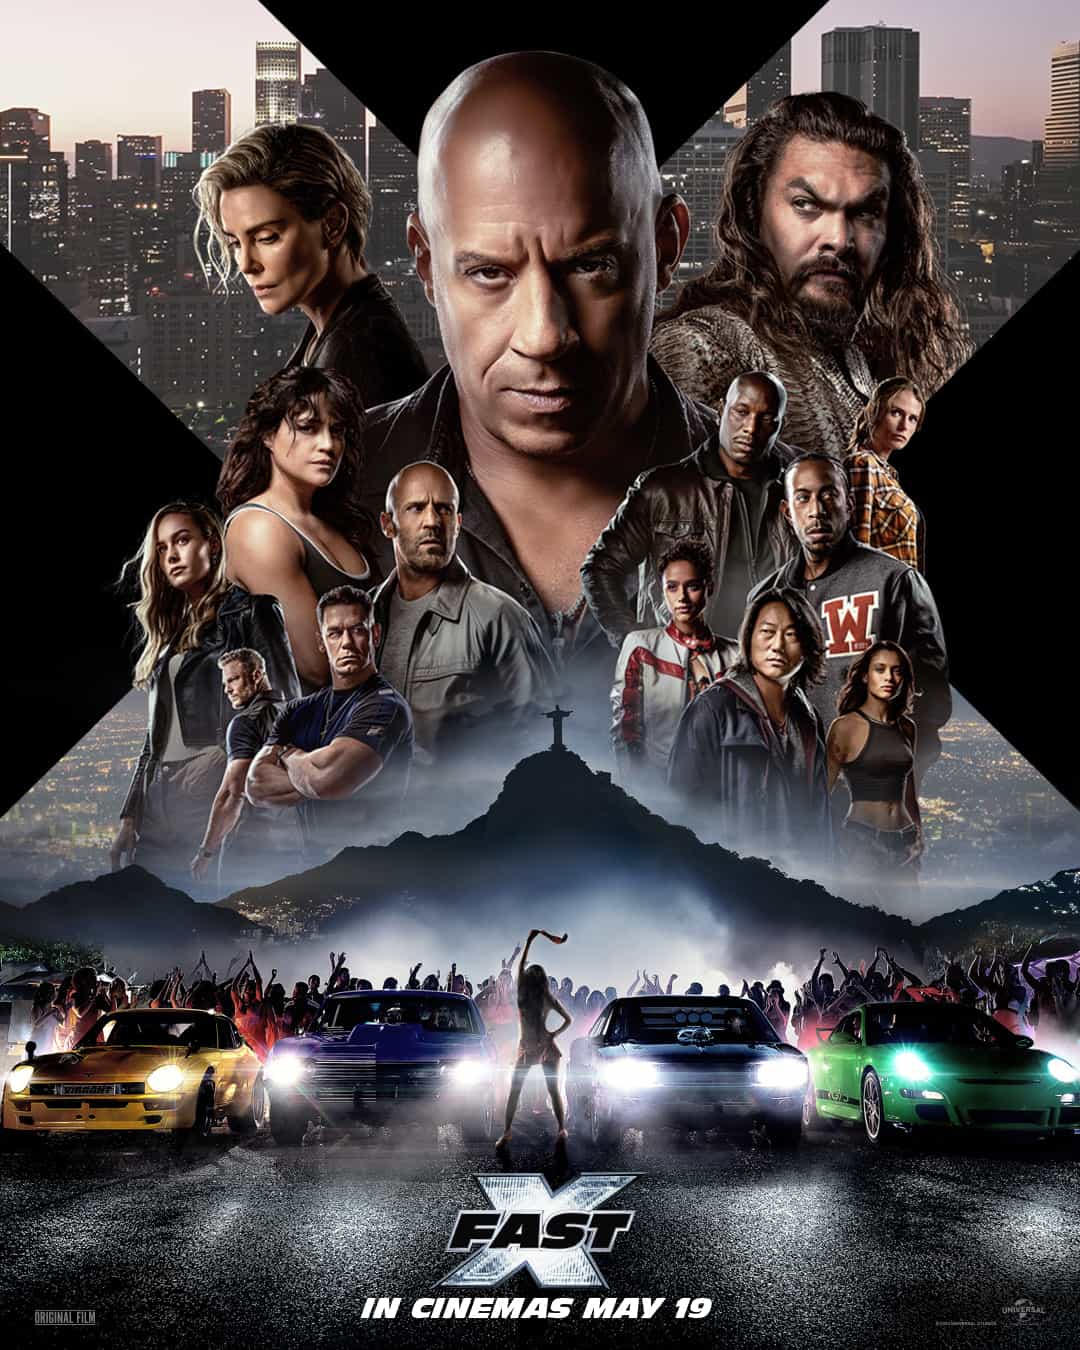 New poster has been released for Fast X which stars Vin Diesel and Brie Larson - movie UK release date 19th May 2023 #fastx